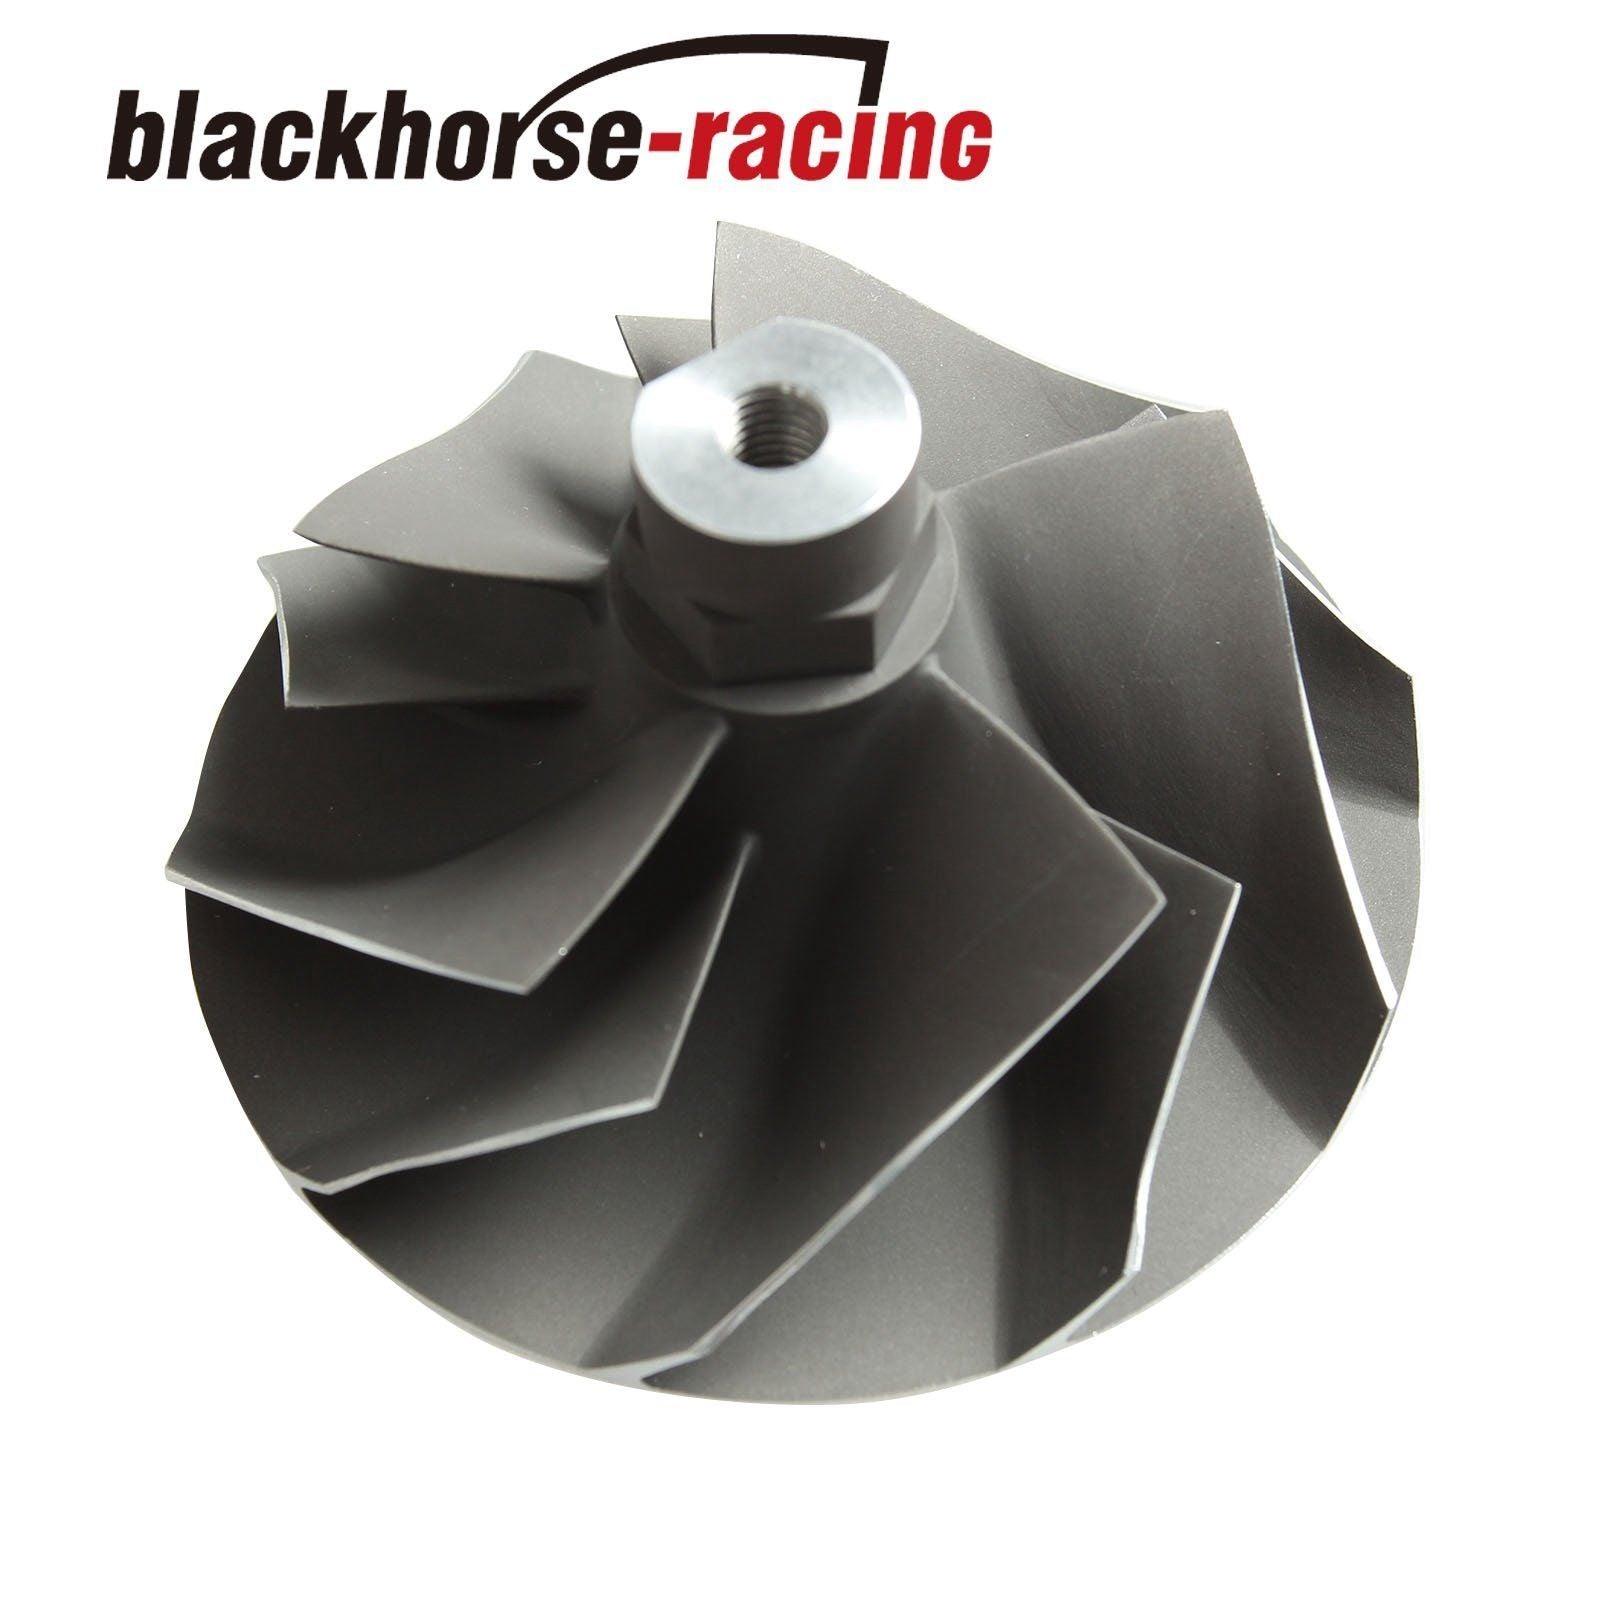 For Powerstroke 7.3L 7.3 Upgraded Turbo Compressor Wicked Wheel TP38 GTP38 Ford - www.blackhorse-racing.com